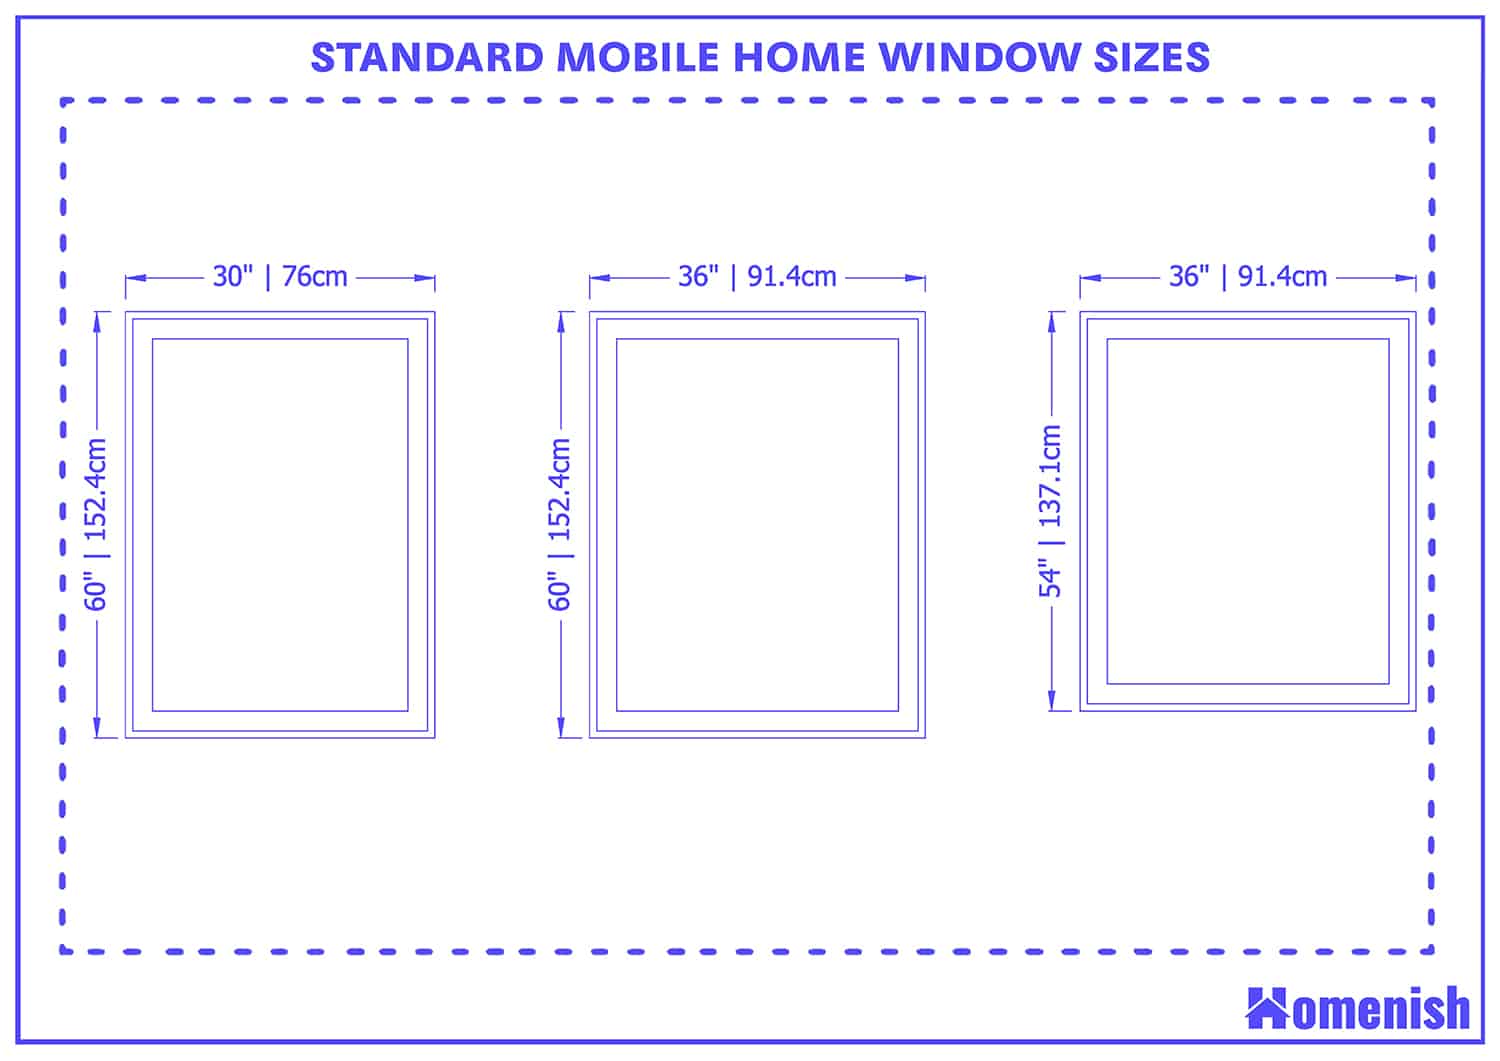 Standard mobile home window sizes